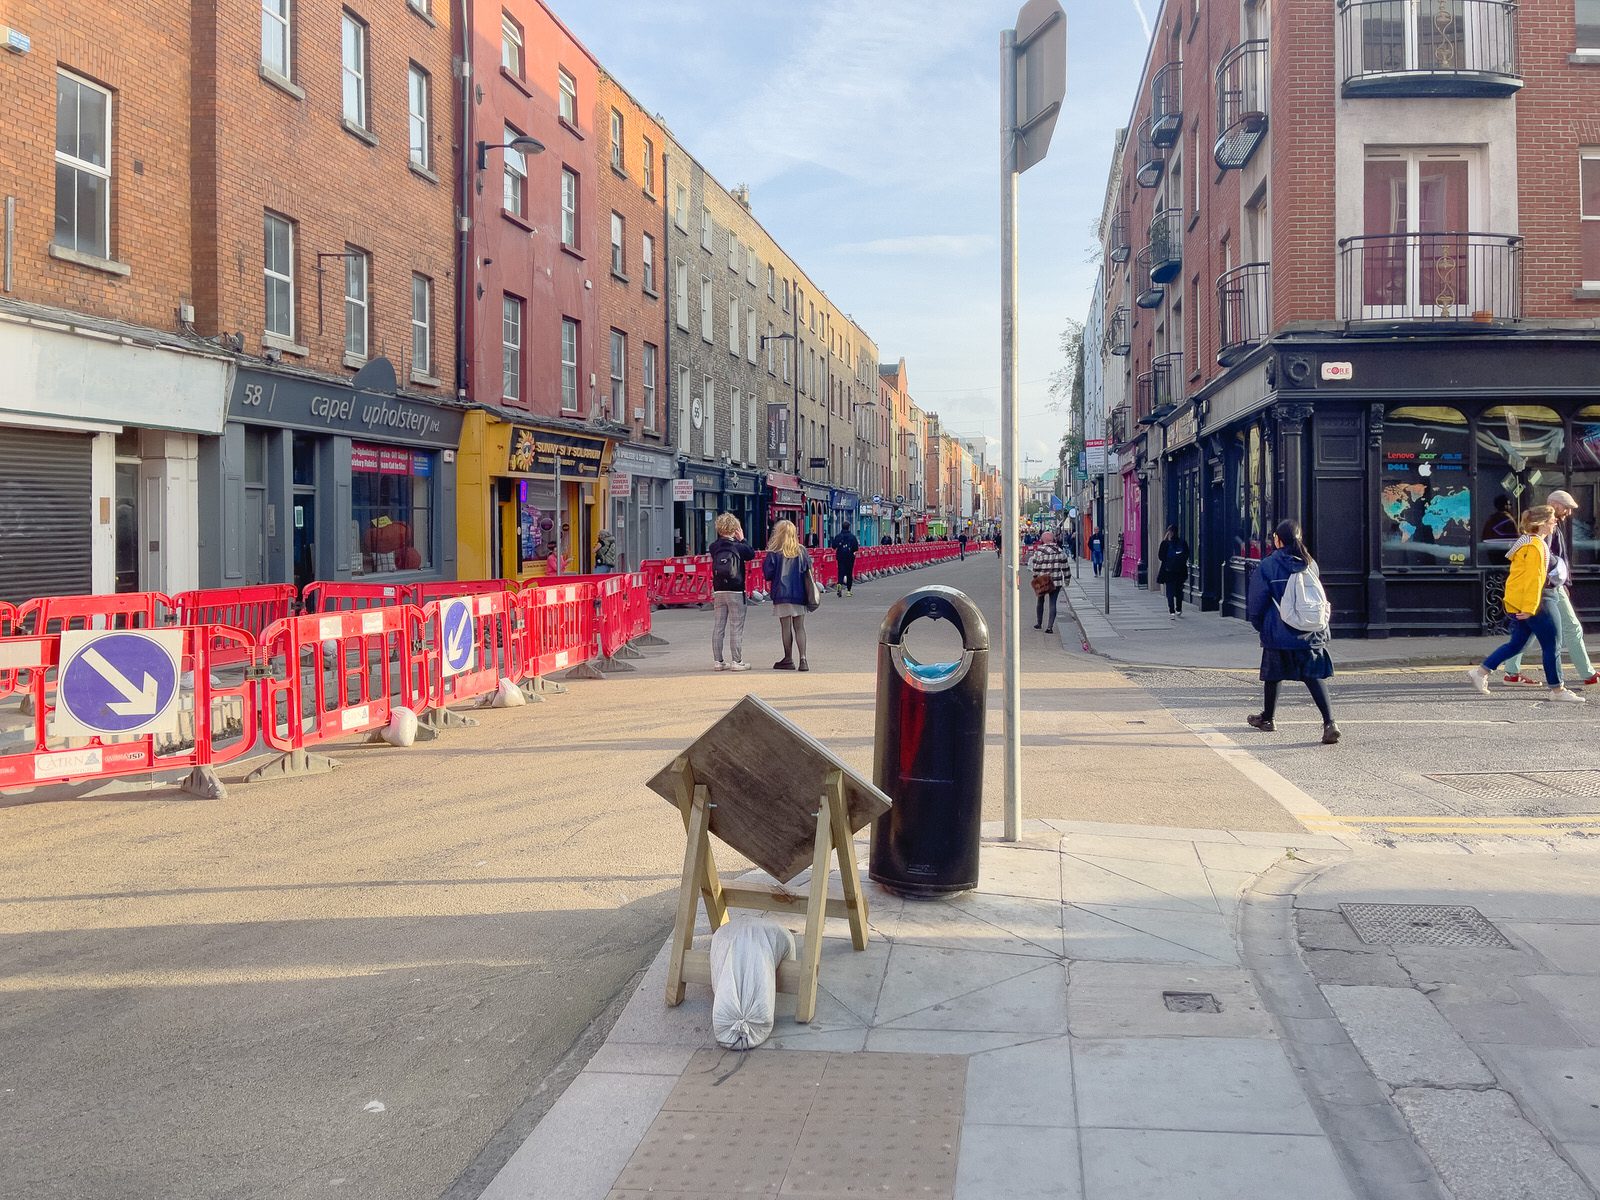 FOLLOWUP VISIT TO CAPEL STREET [TODAY I USED AN iPHONE 12 PRO MAX] 002